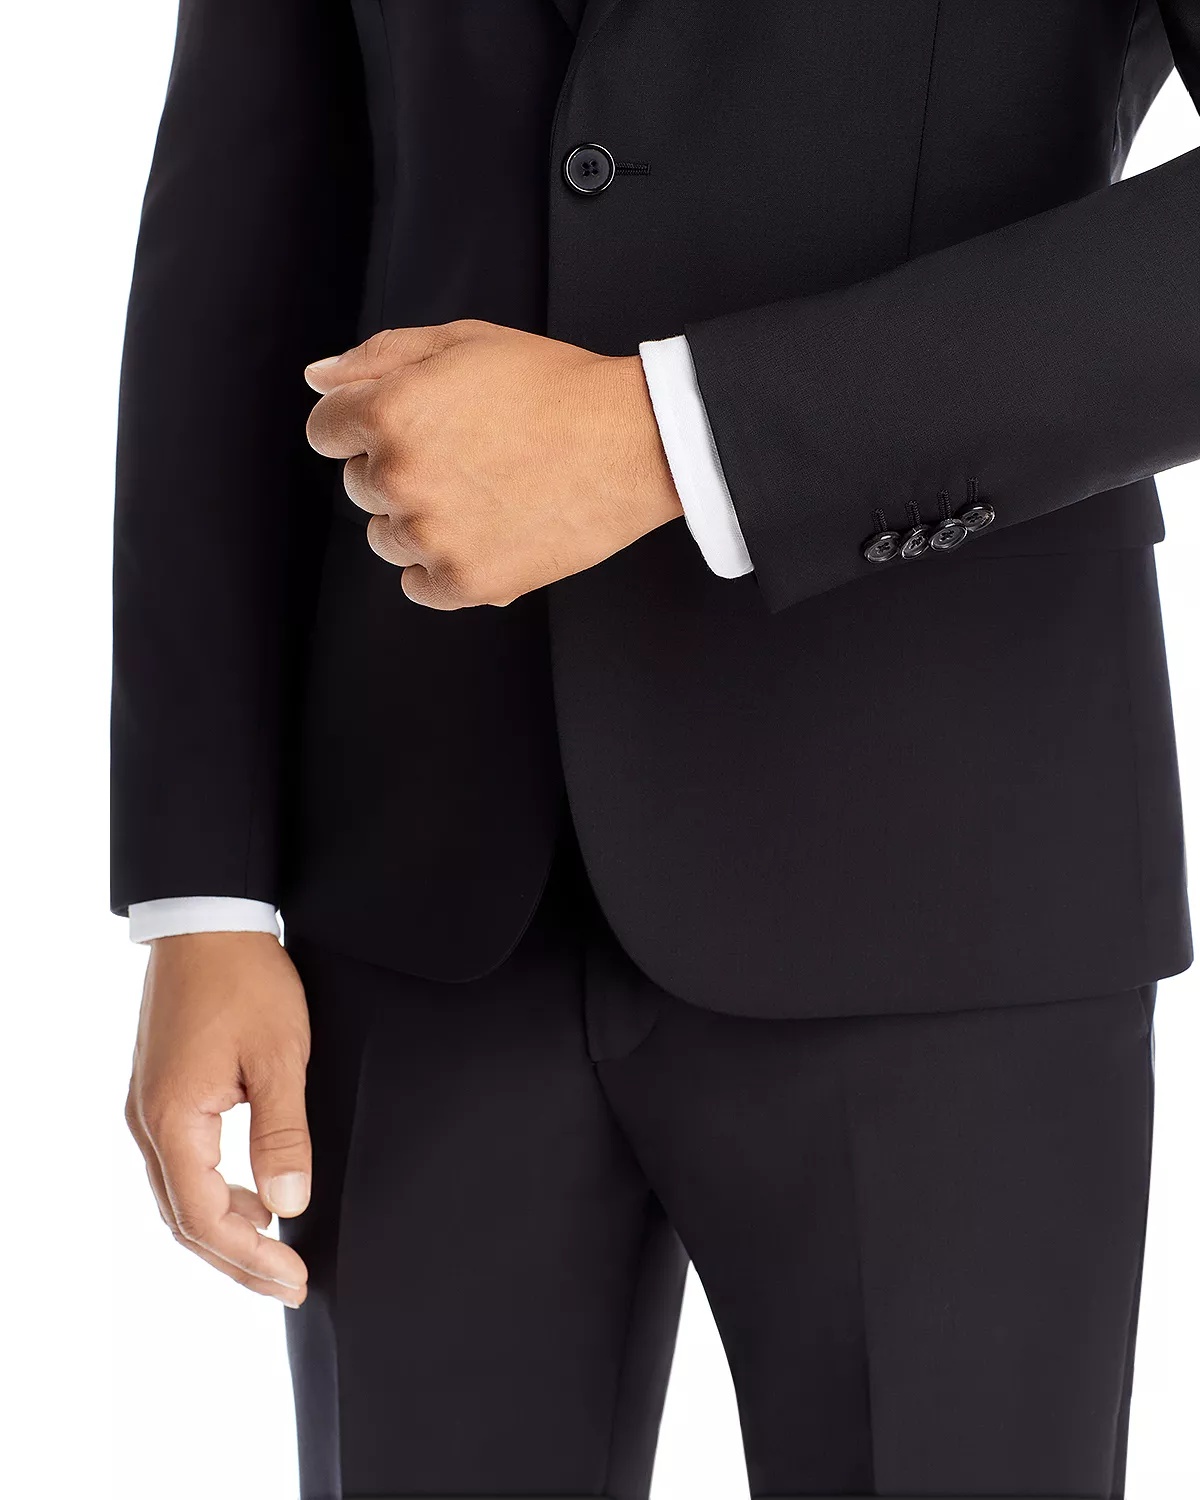 Soho Wool & Mohair Extra Slim Fit Suit - 100% Exclusive - 5